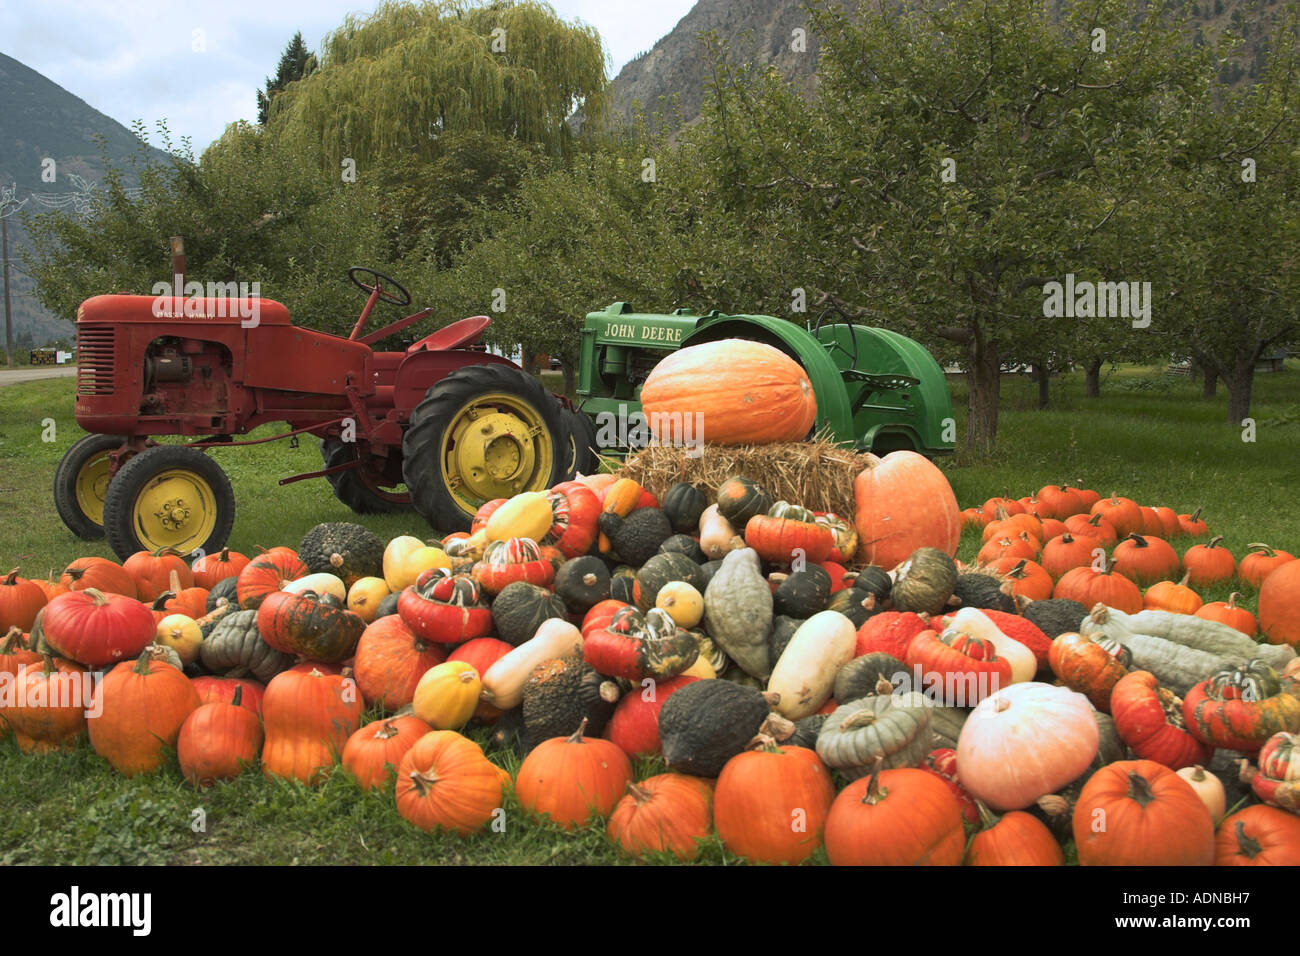 An enormous amount of squash and pumpkins of various sizes on a roadside in Canada The farmers old tractors are in the photo too Stock Photo